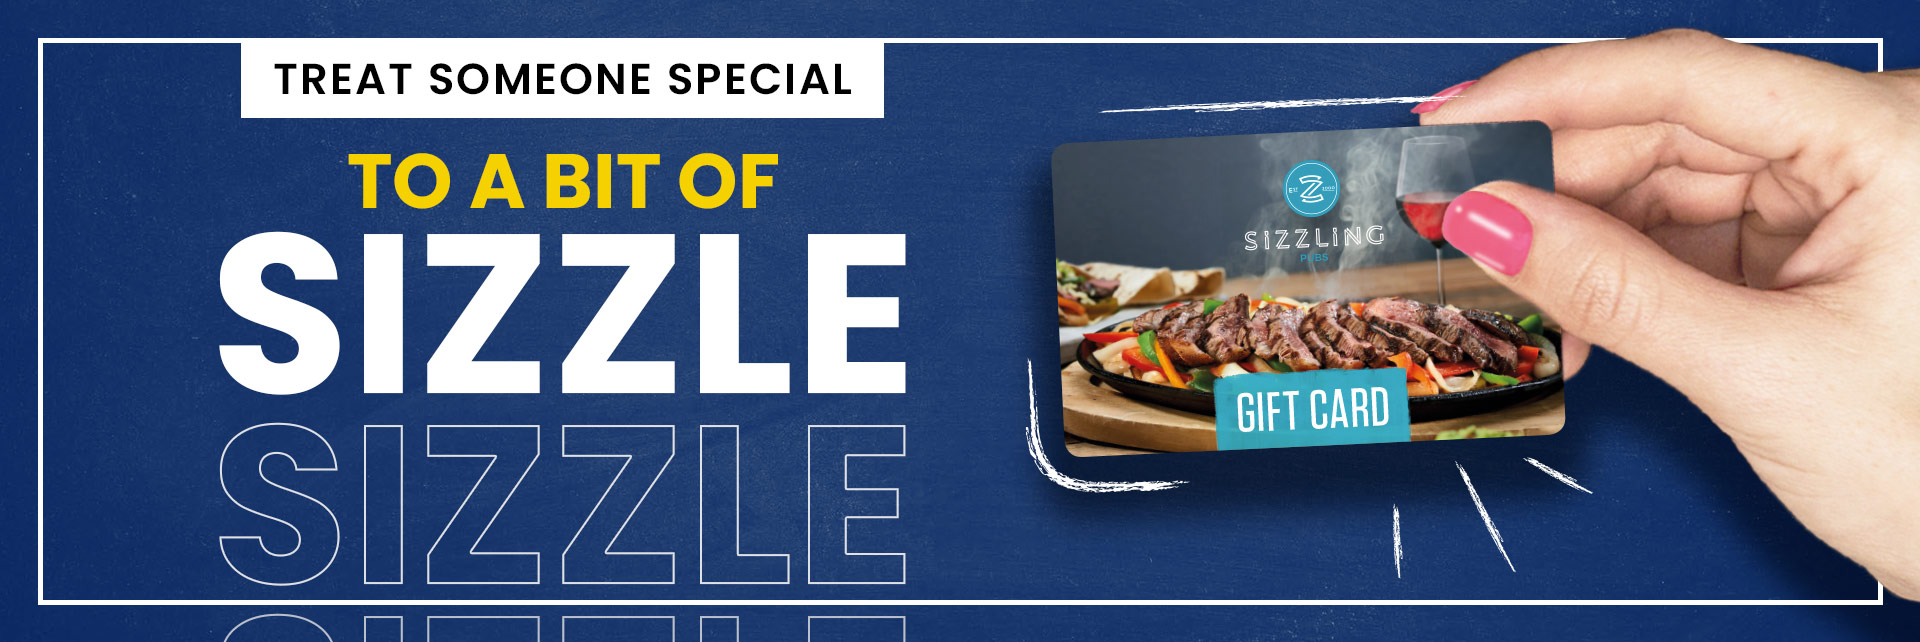 Sizzling Pubs Gift Card at The King Henry in Rotherham